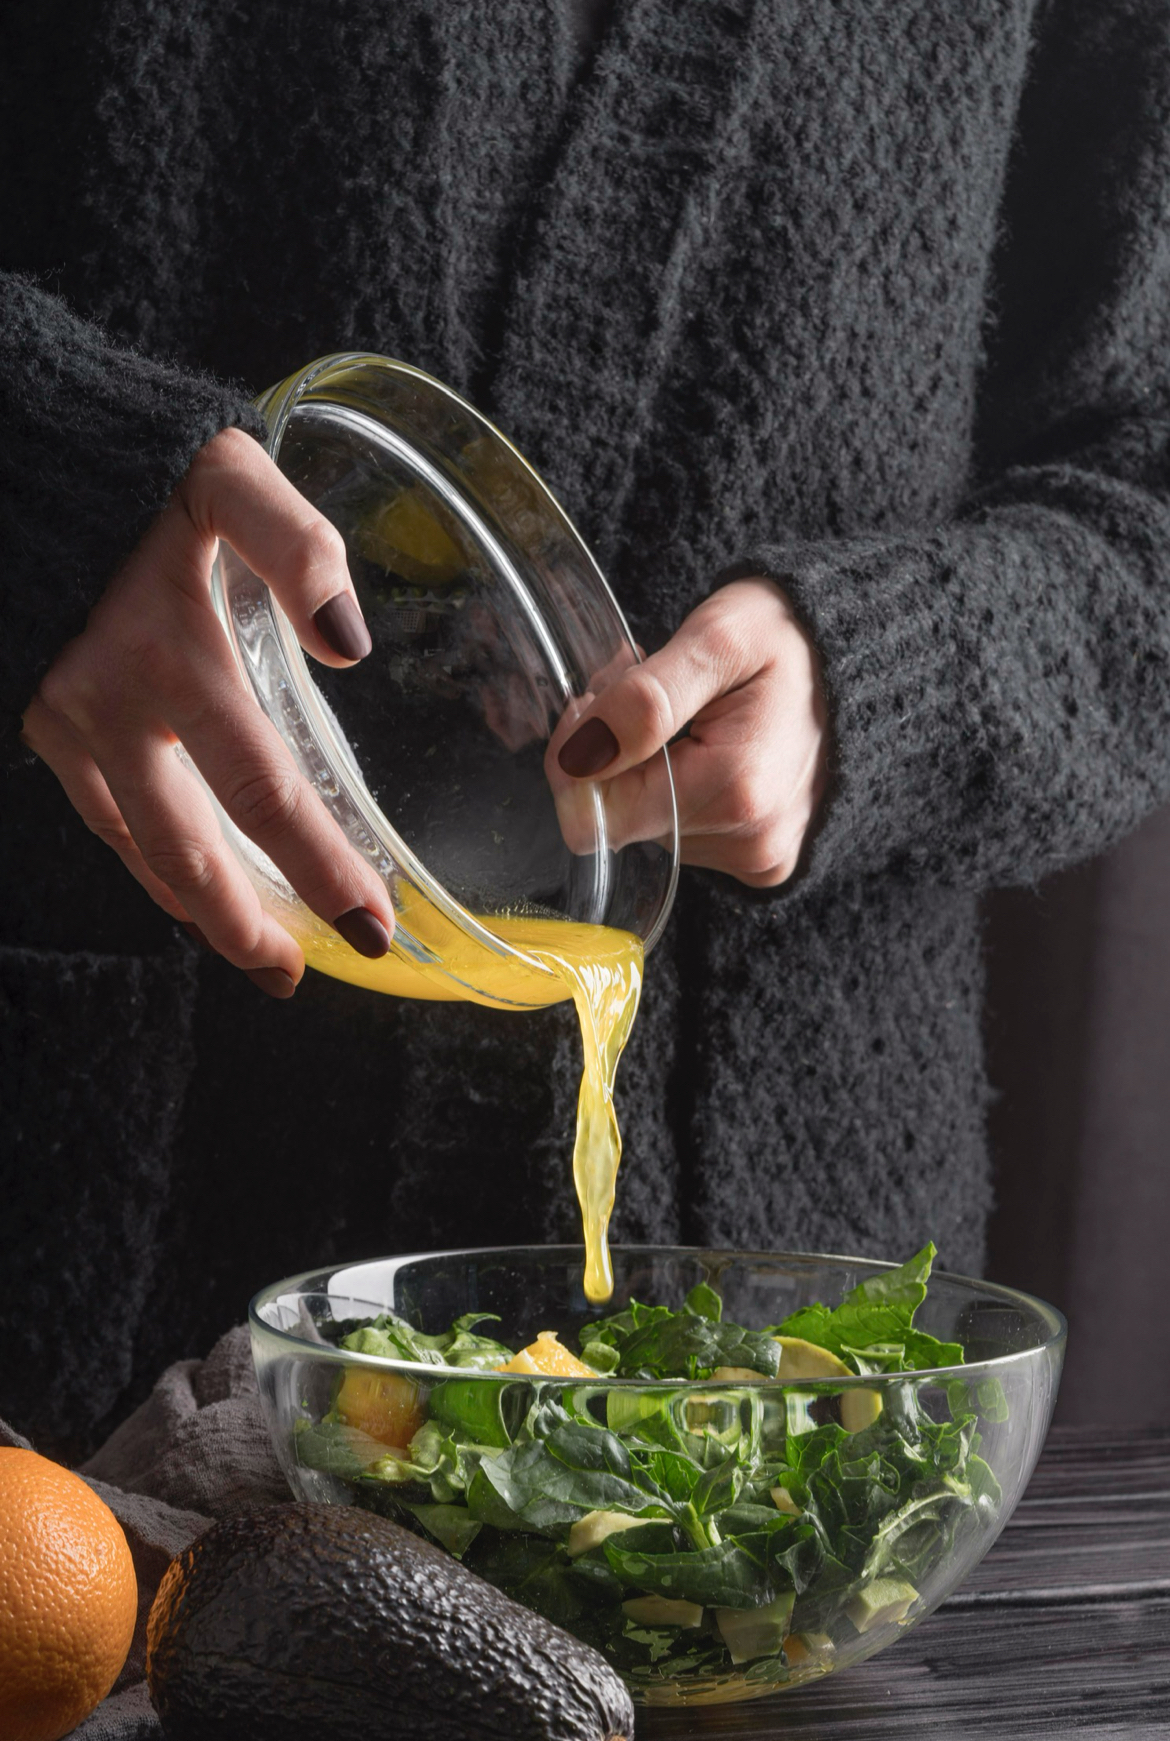 How To Stop Your Homemade Vinaigrette From Separating